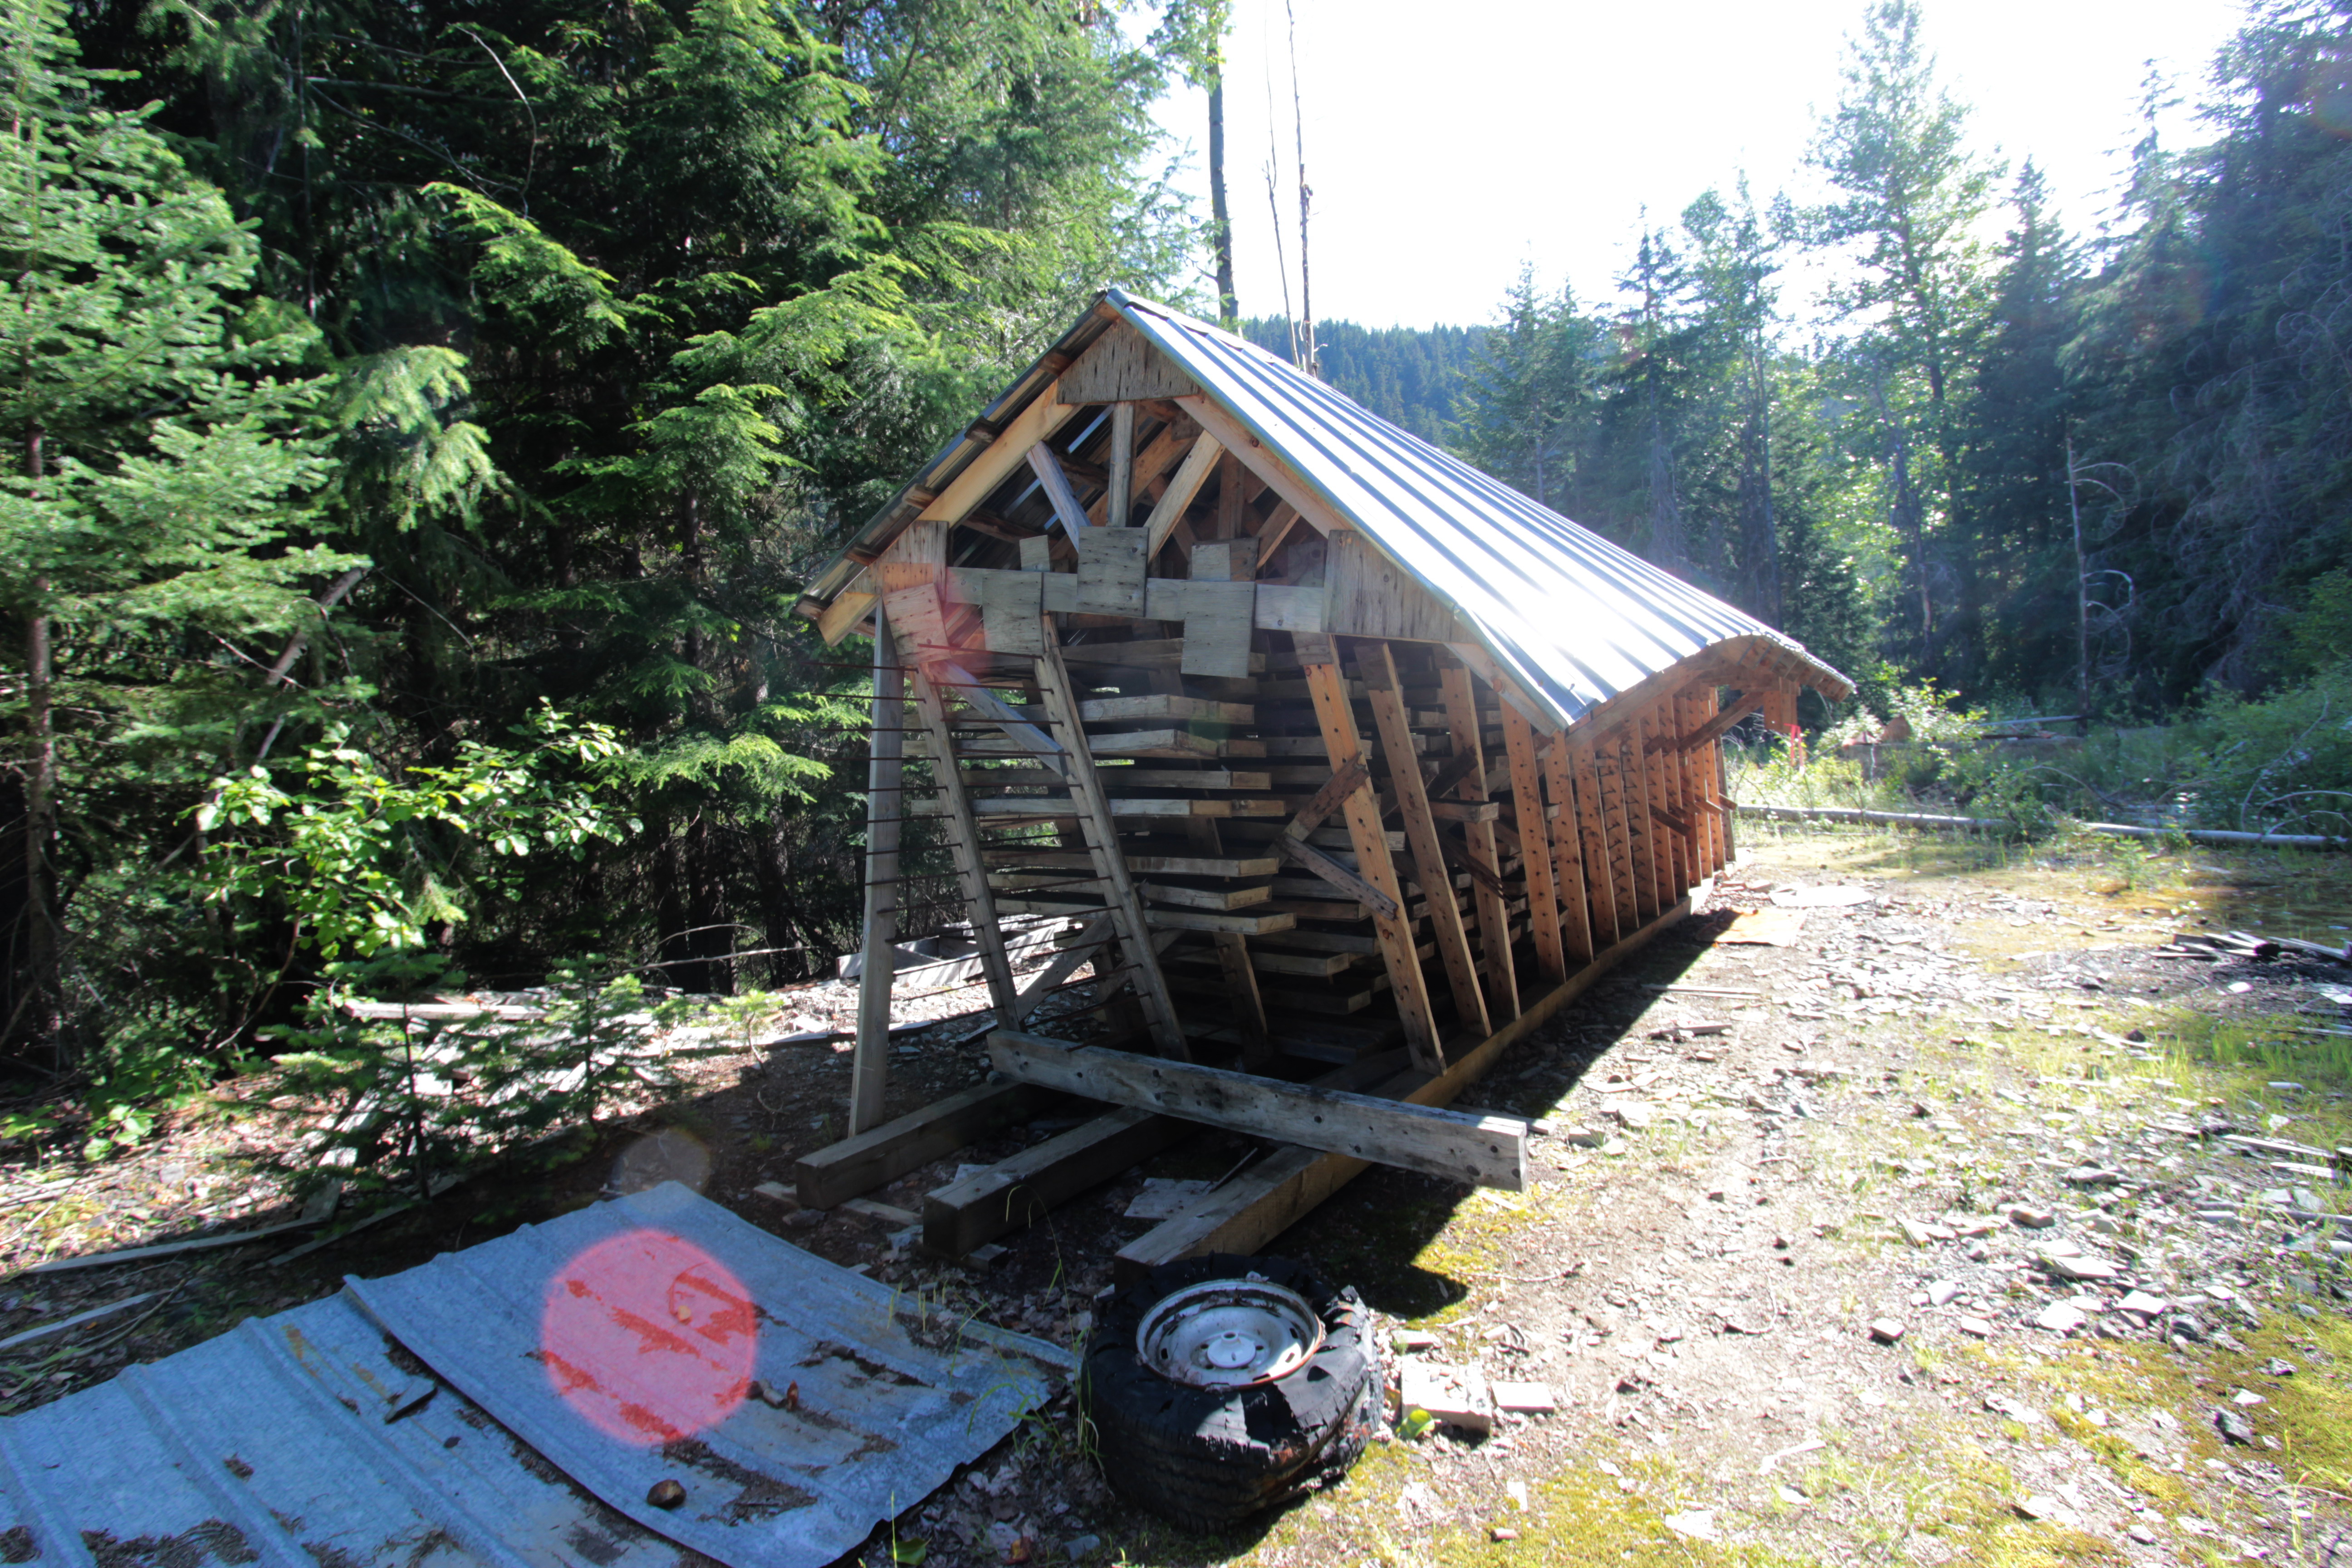 A core sample shack near the area Imperial Metals wants to explore. Canada-U.S. watershed commission renews effort to purchase mining tenures in Skagit-Manning park area from Imperial Metals. The company, best known for the collapse of its tailings same in the B.C. Interior in 2014, has applied for an exploration permit to carry out work in the so-called “donut area.”